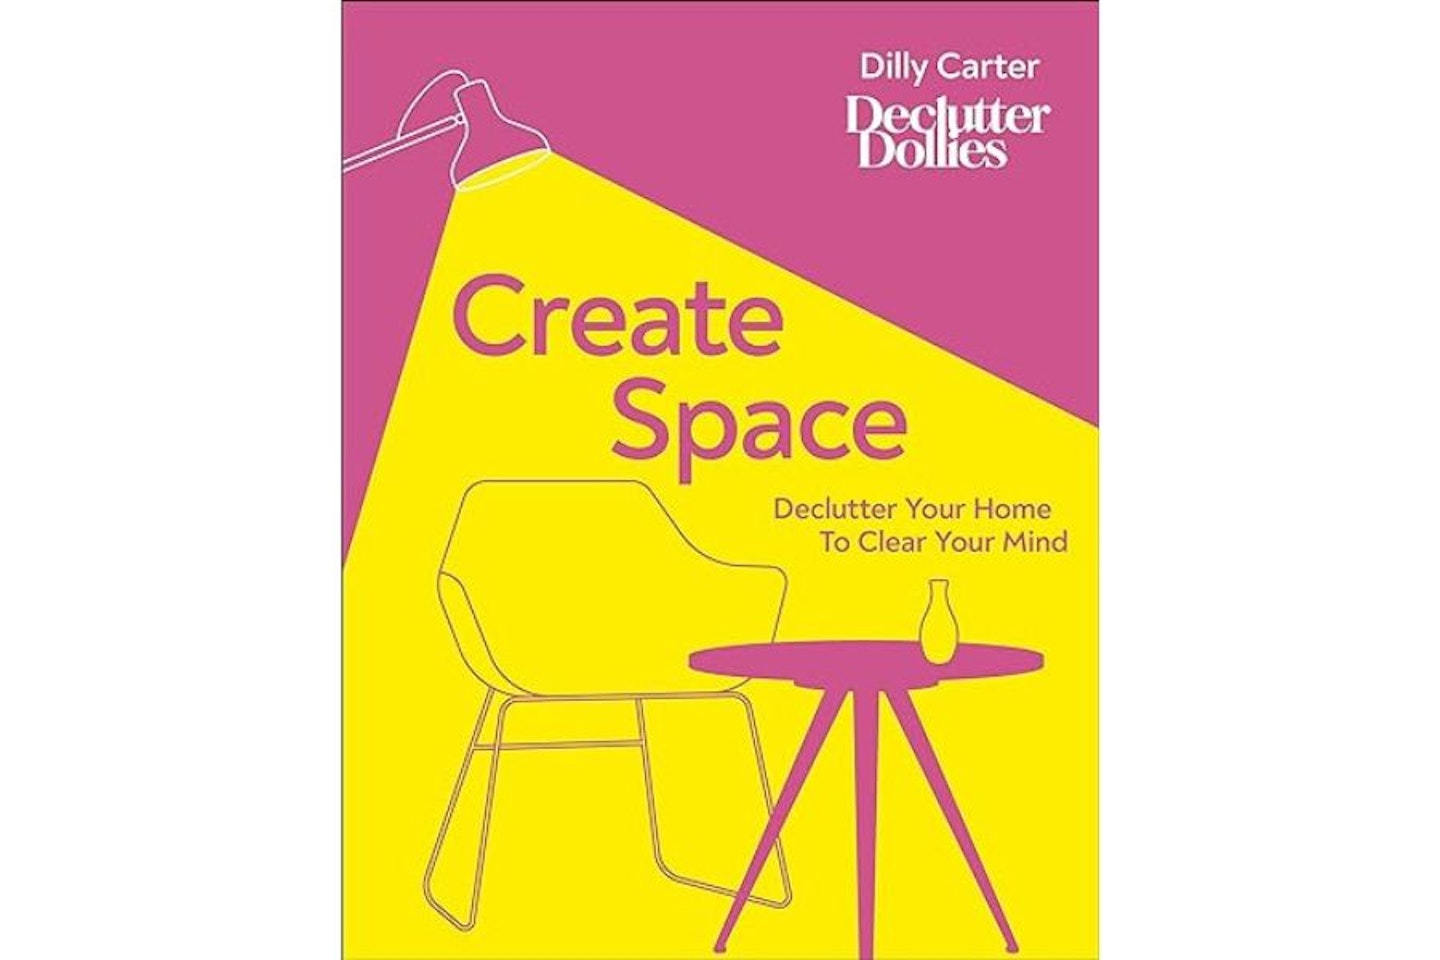 Dilly Carter Create Space Declutter Your Home to Clear Your Mind